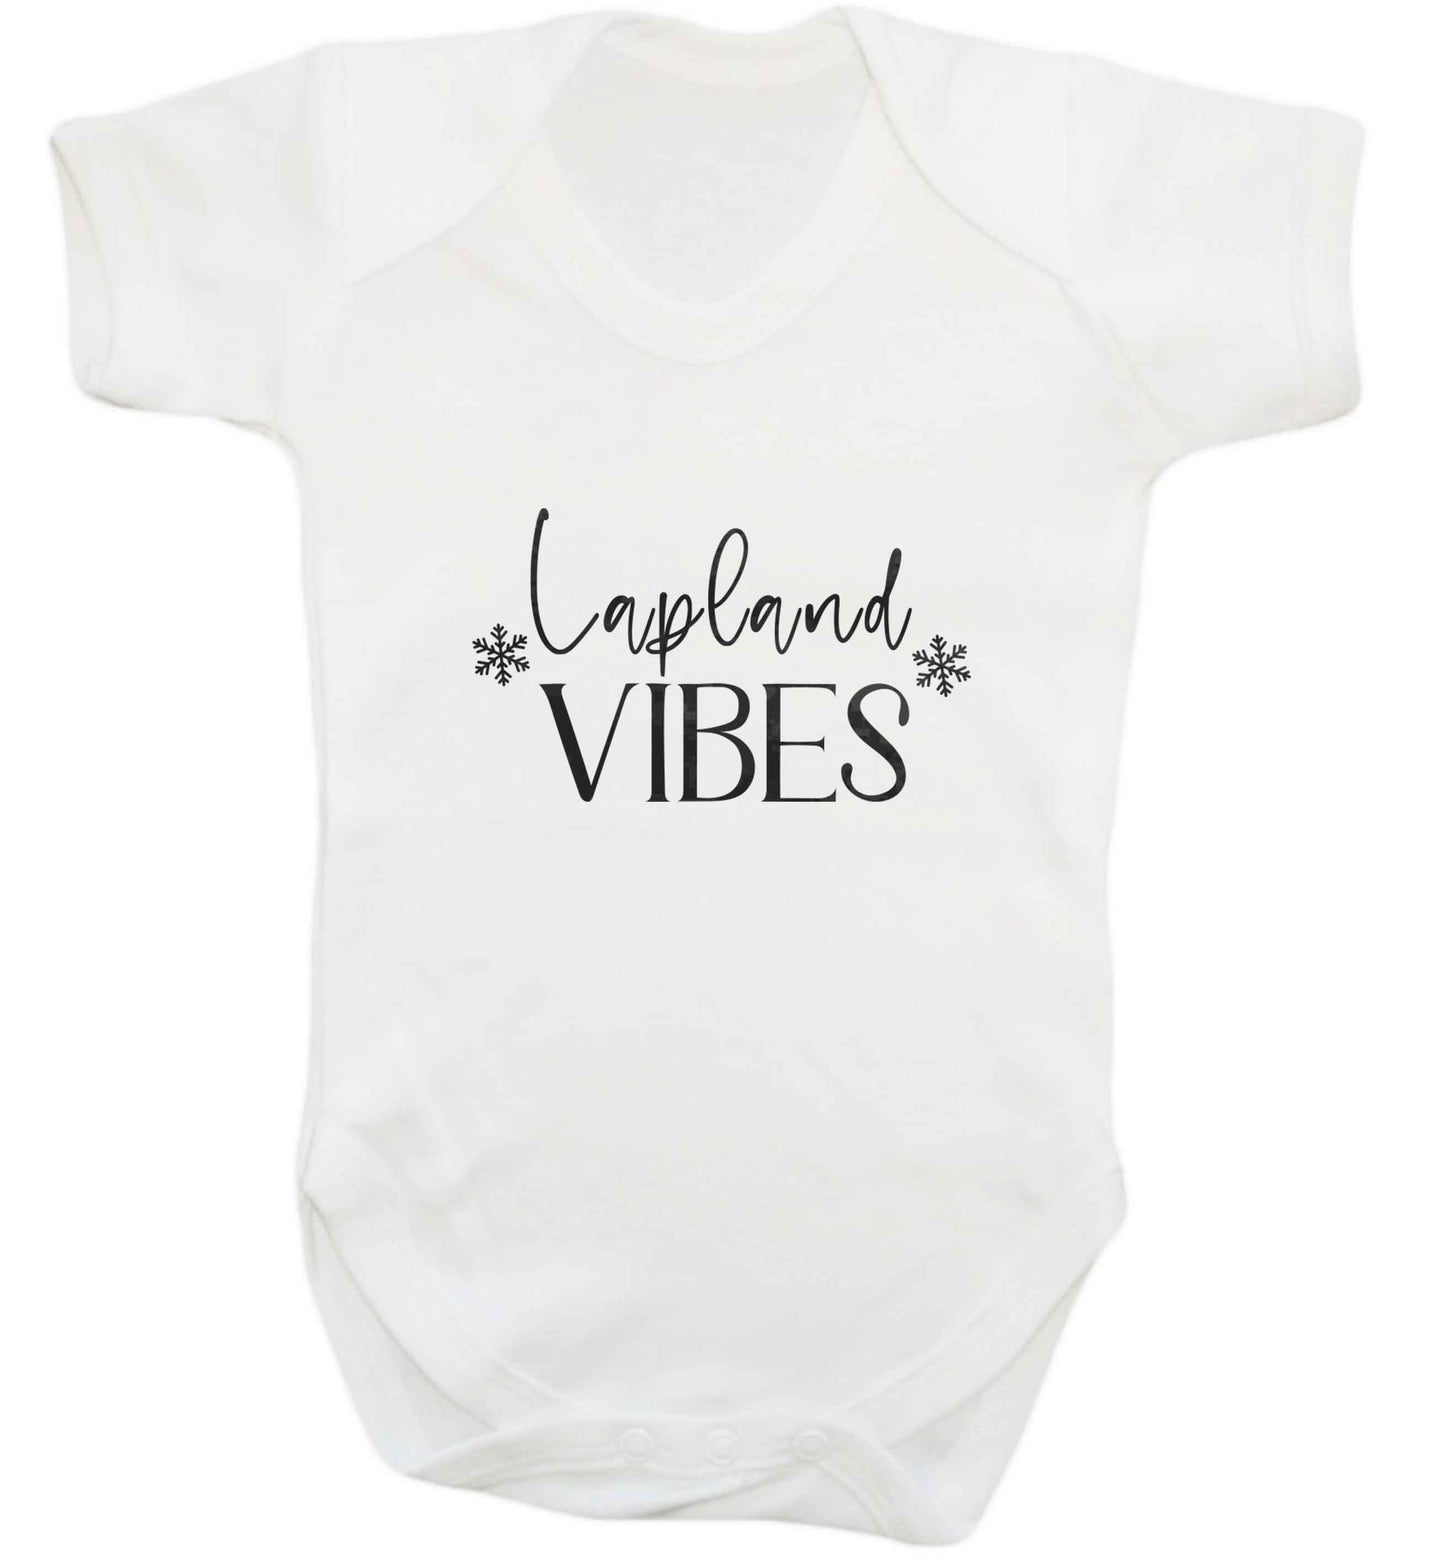 Lapland vibes baby vest white 18-24 months